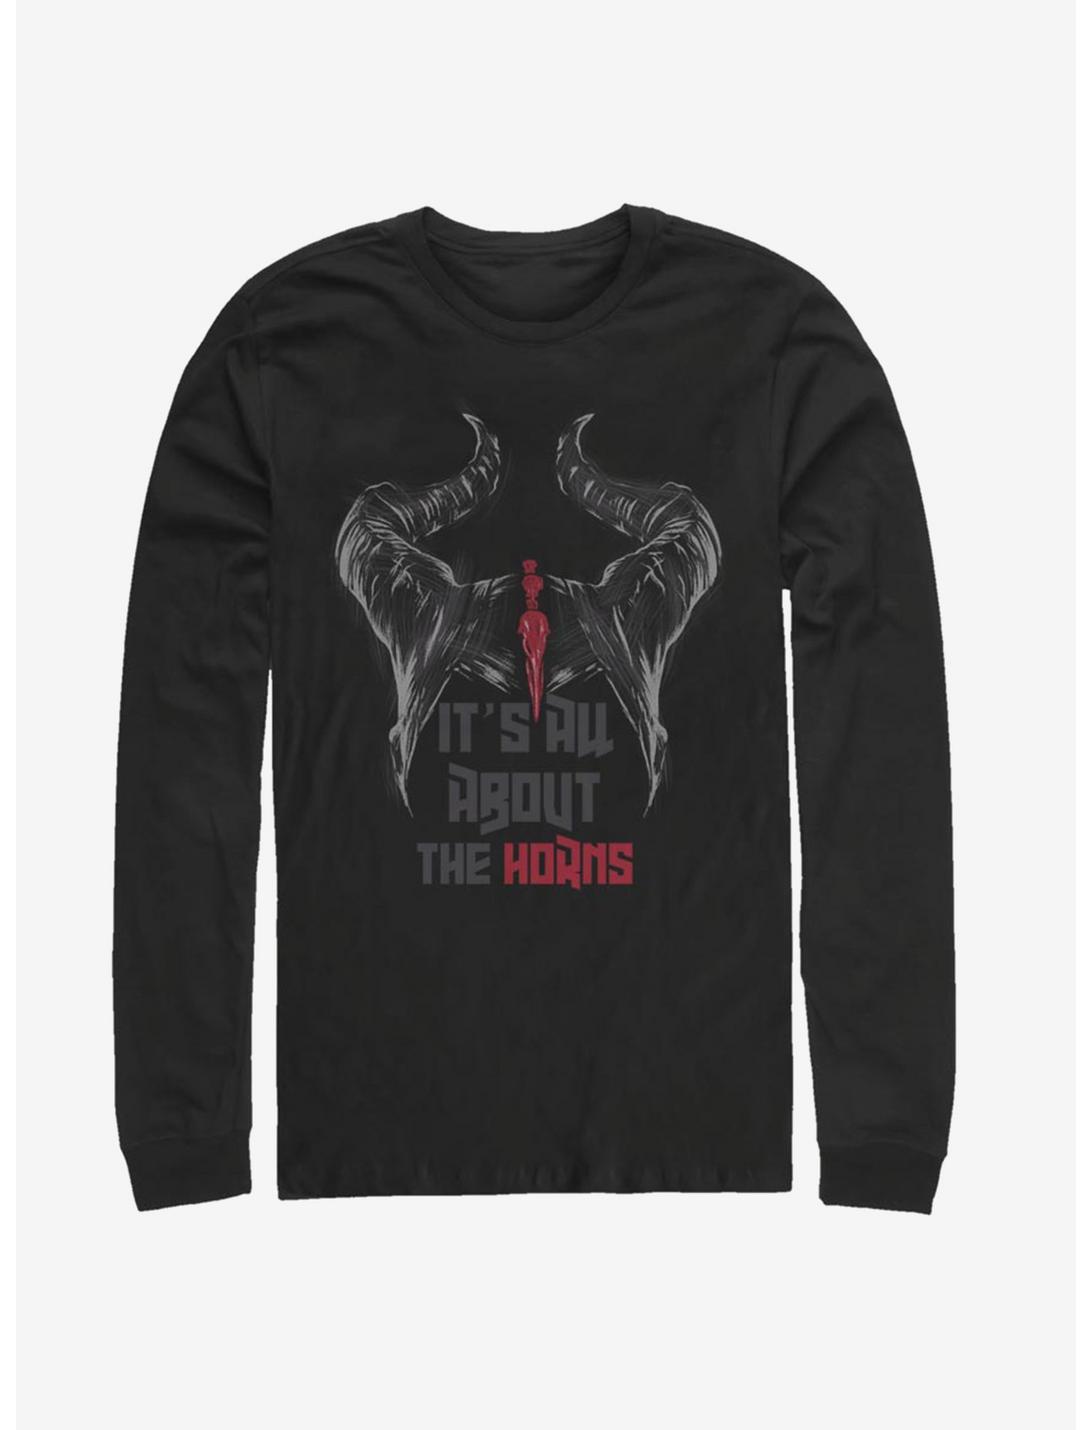 Disney Maleficent: Mistress Of Evil It's All About The Horns Long-Sleeve T-Shirt, BLACK, hi-res